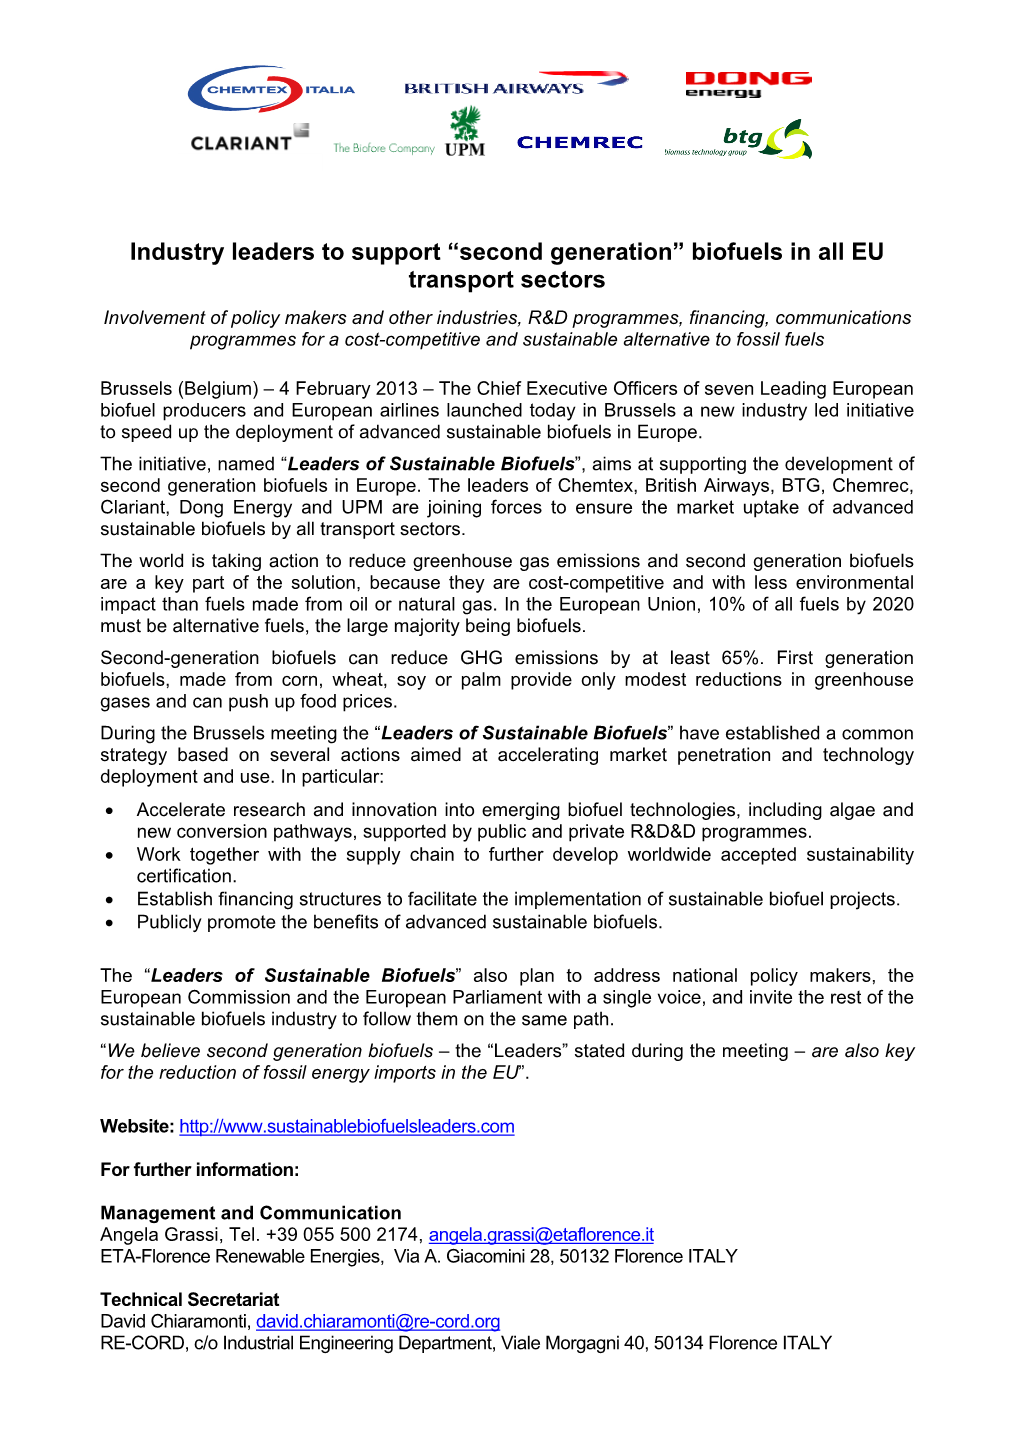 Industry Leaders to Support “Second Generation” Biofuels in All EU Transport Sectors